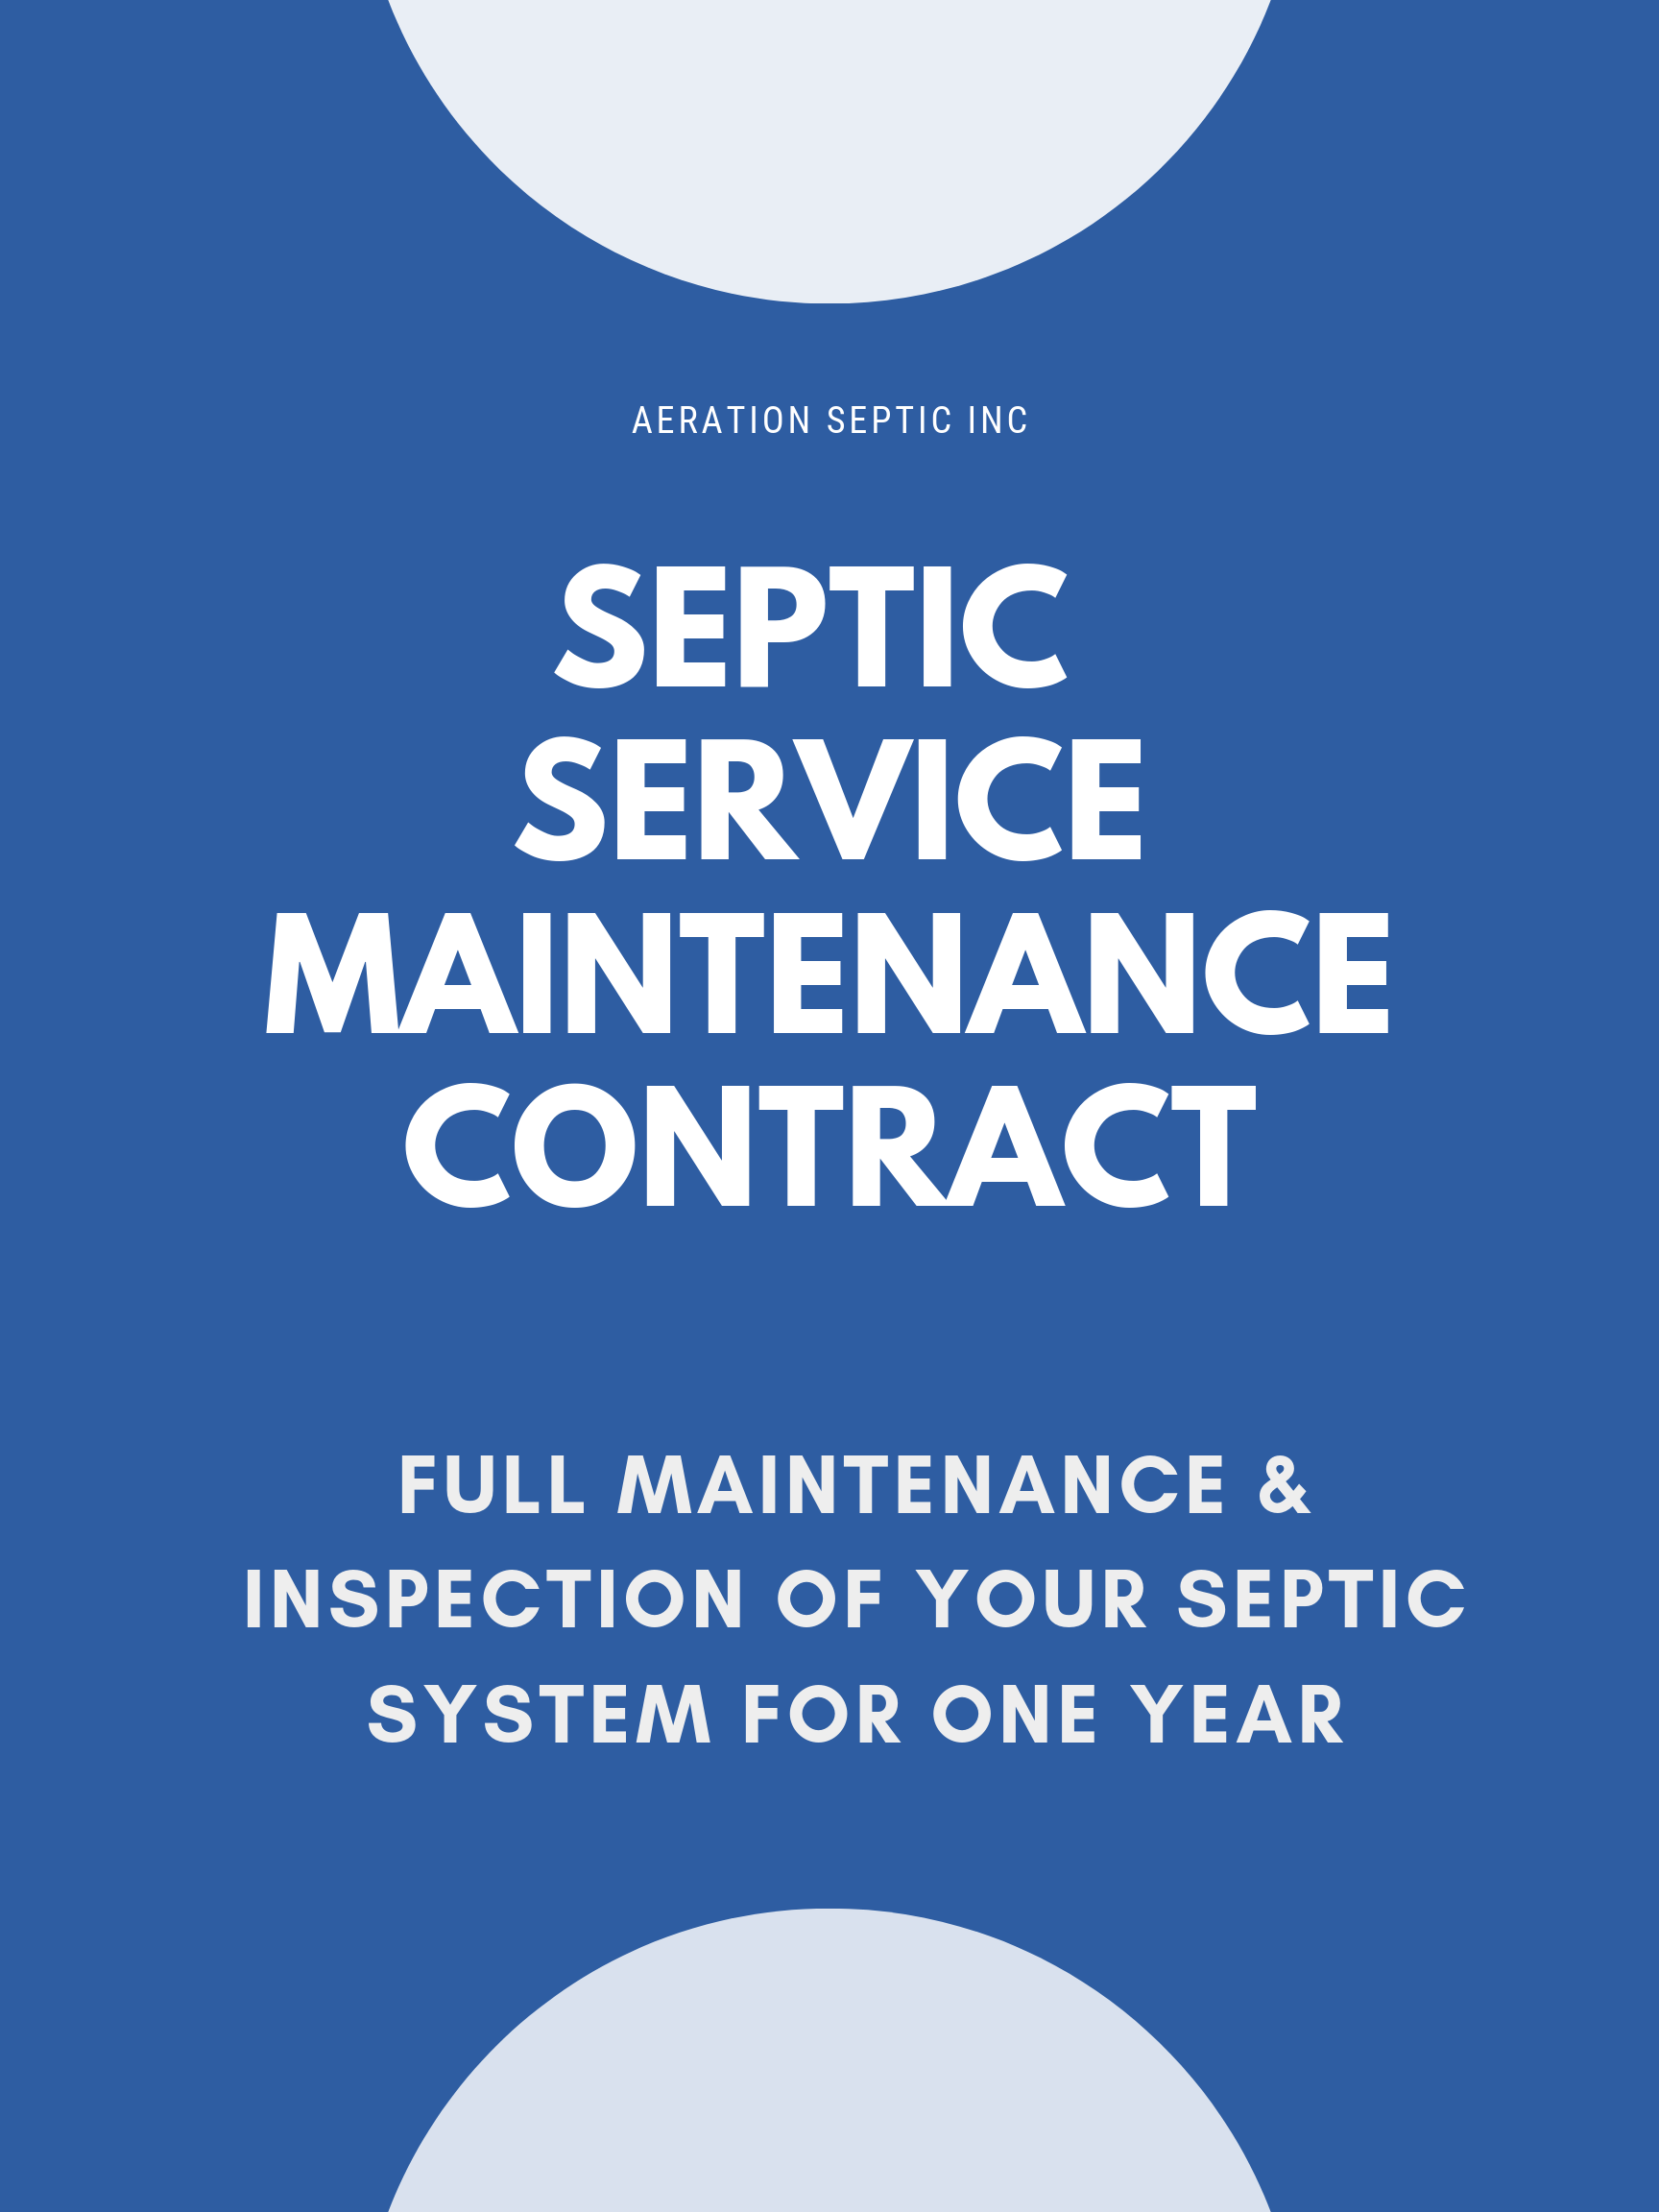 Portage County Health Department Septic Regulations